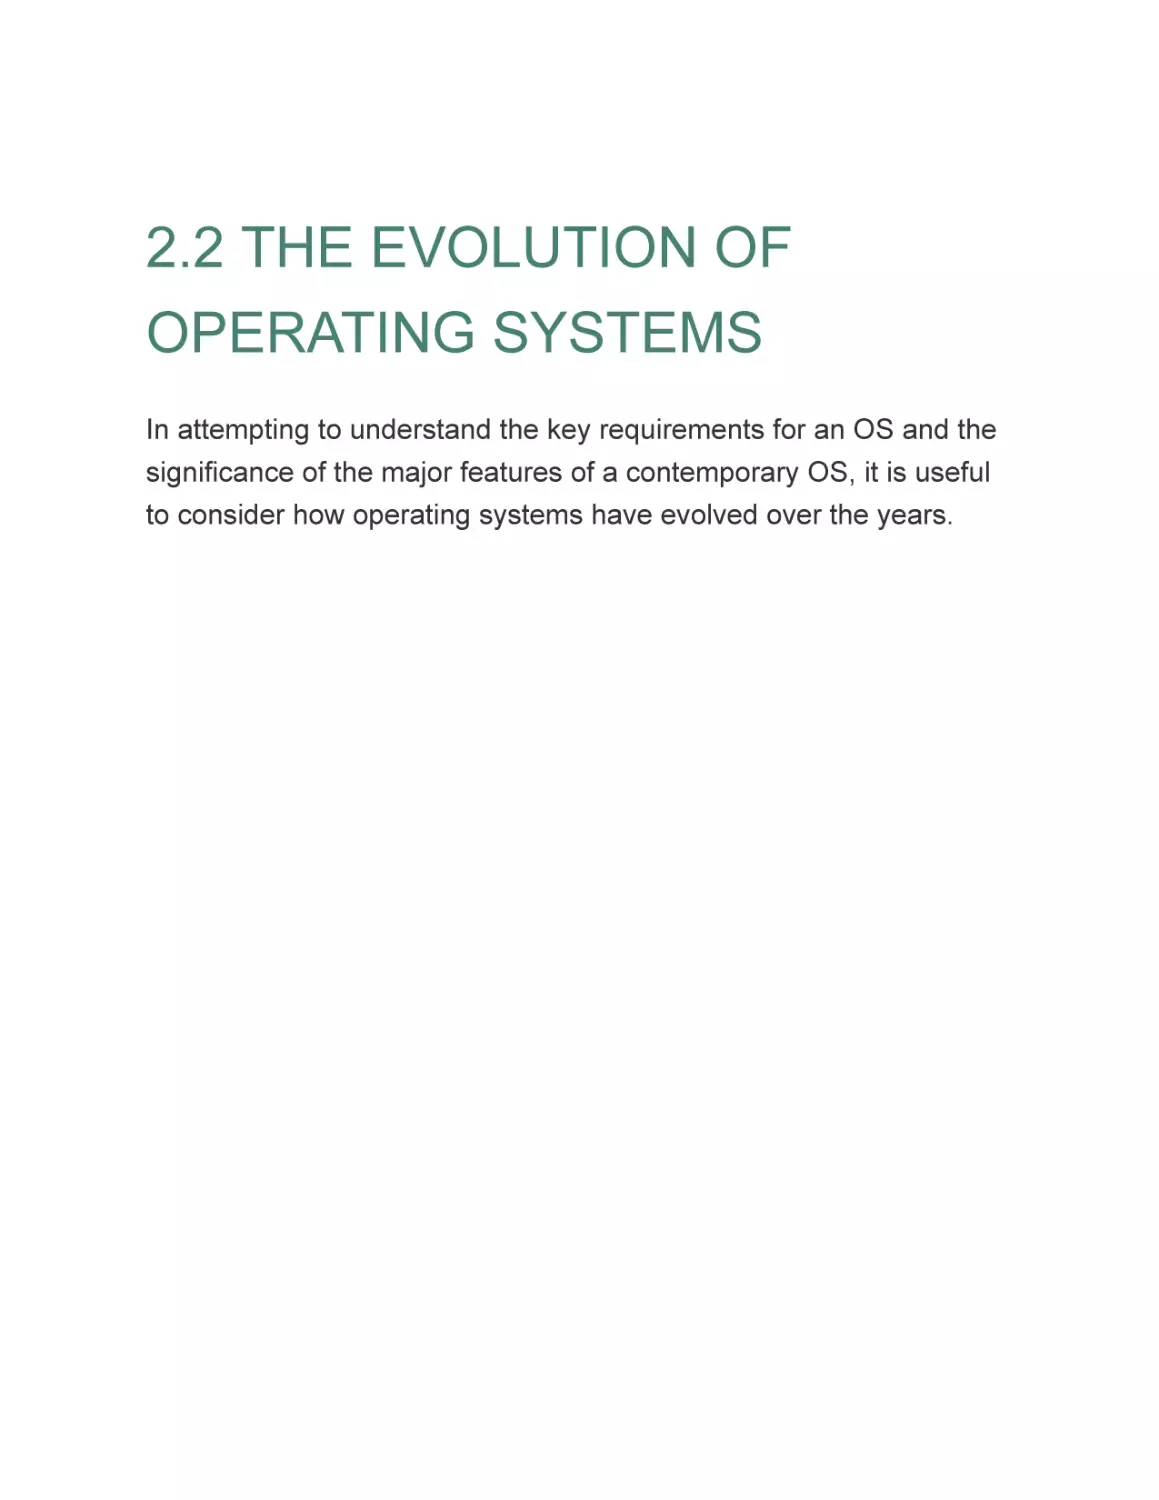 2.2 THE EVOLUTION OF OPERATING SYSTEMS